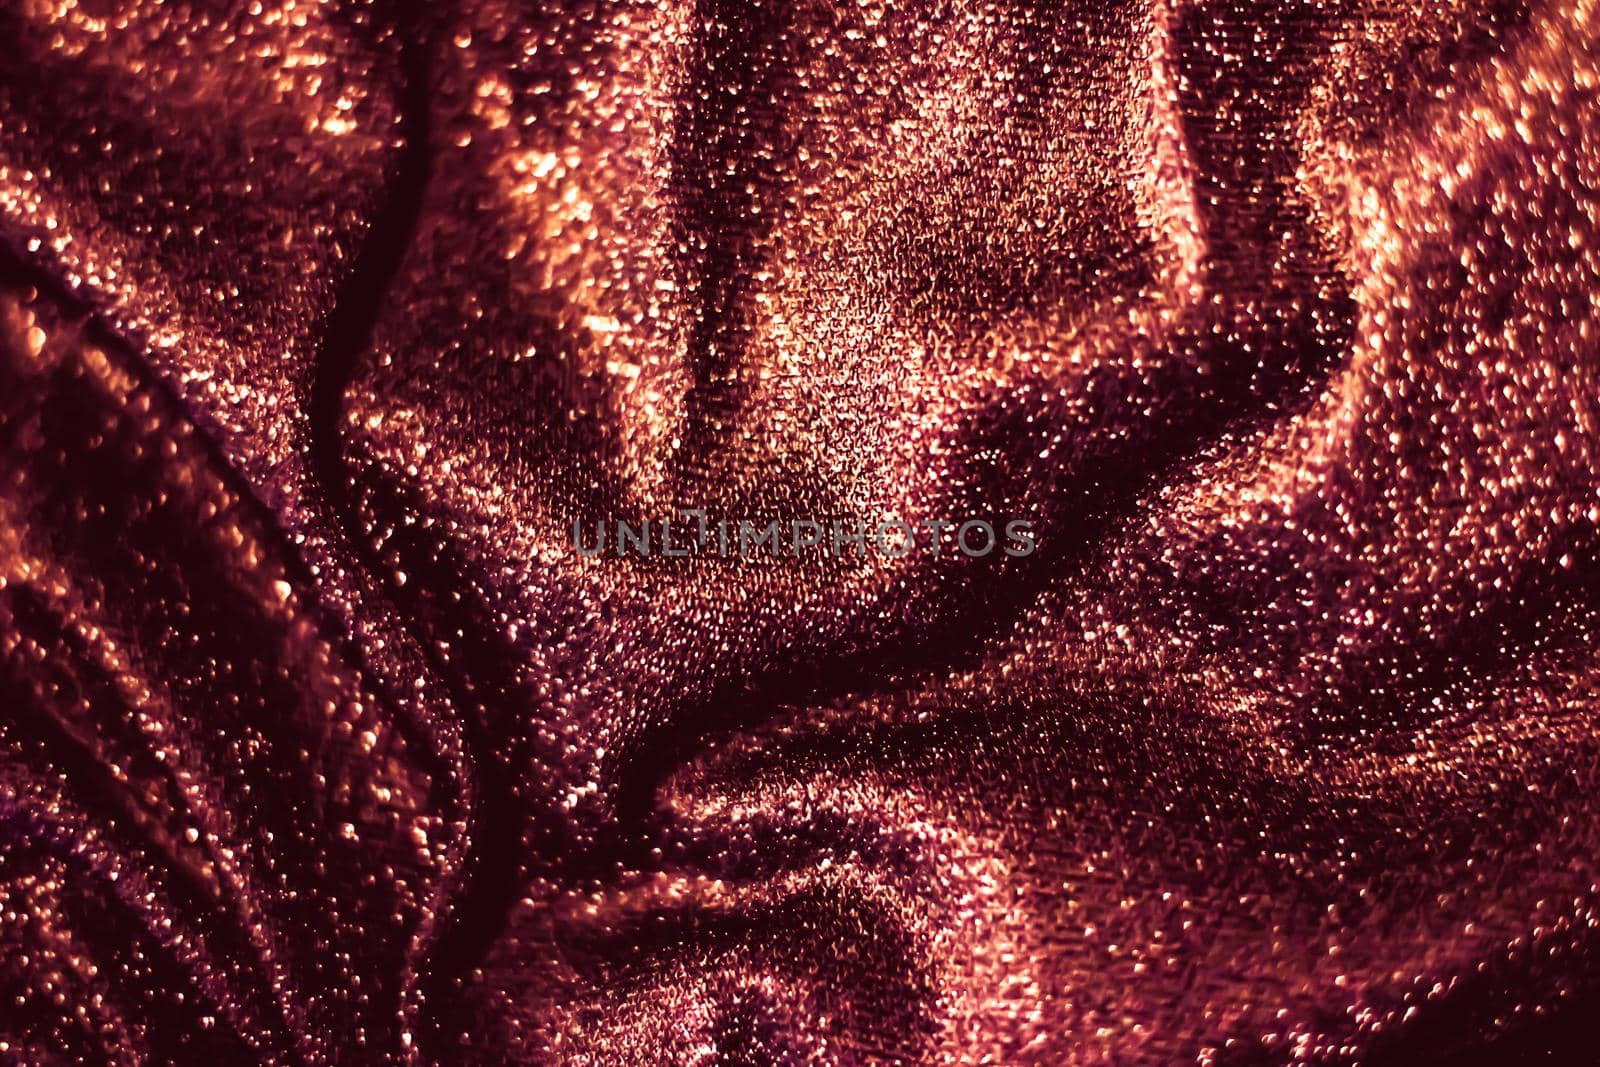 Luxe glowing texture, night club branding and New Years party concept - Red holiday sparkling glitter abstract background, luxury shiny fabric material for glamour design and festive invitation